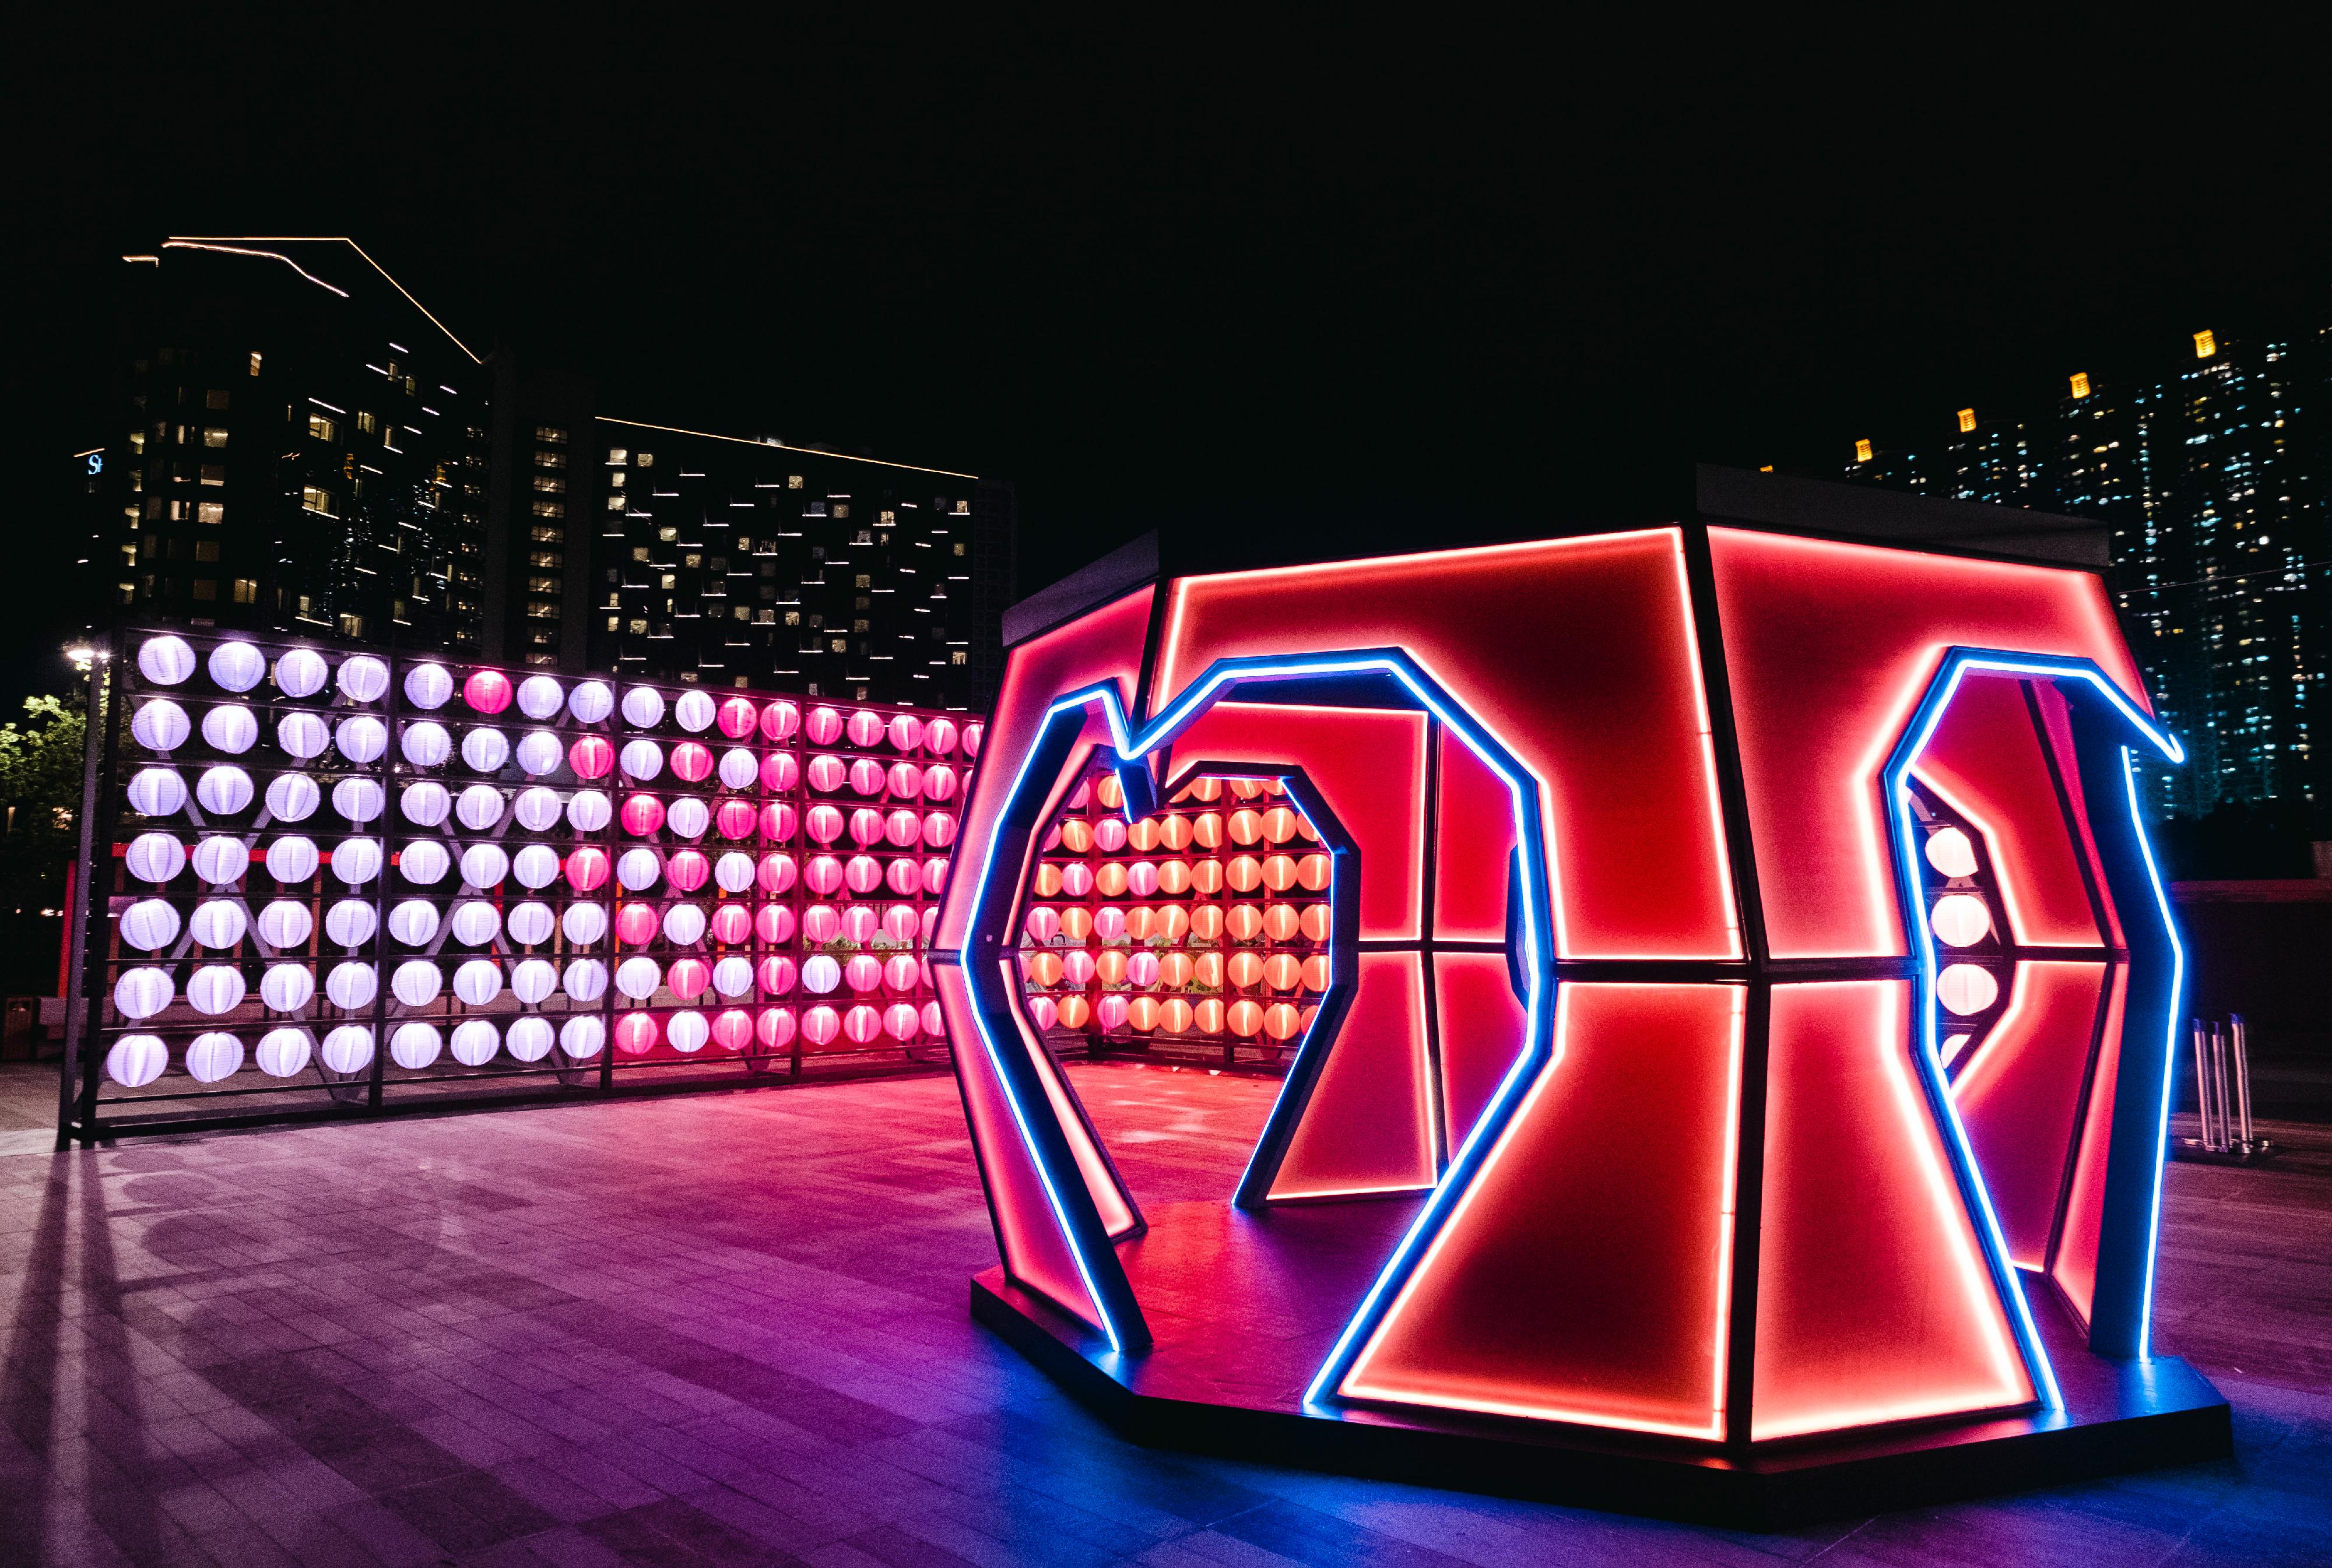 The Sustainable Lantau Office under the Civil Engineering and Development Department will organise the "Love and Reunion" Lantern Festival at Tung Chung East Promenade from tomorrow (September 2) to September 13. Photo shows a giant neon lantern designed by renowned young architect Mr Stanley Siu.